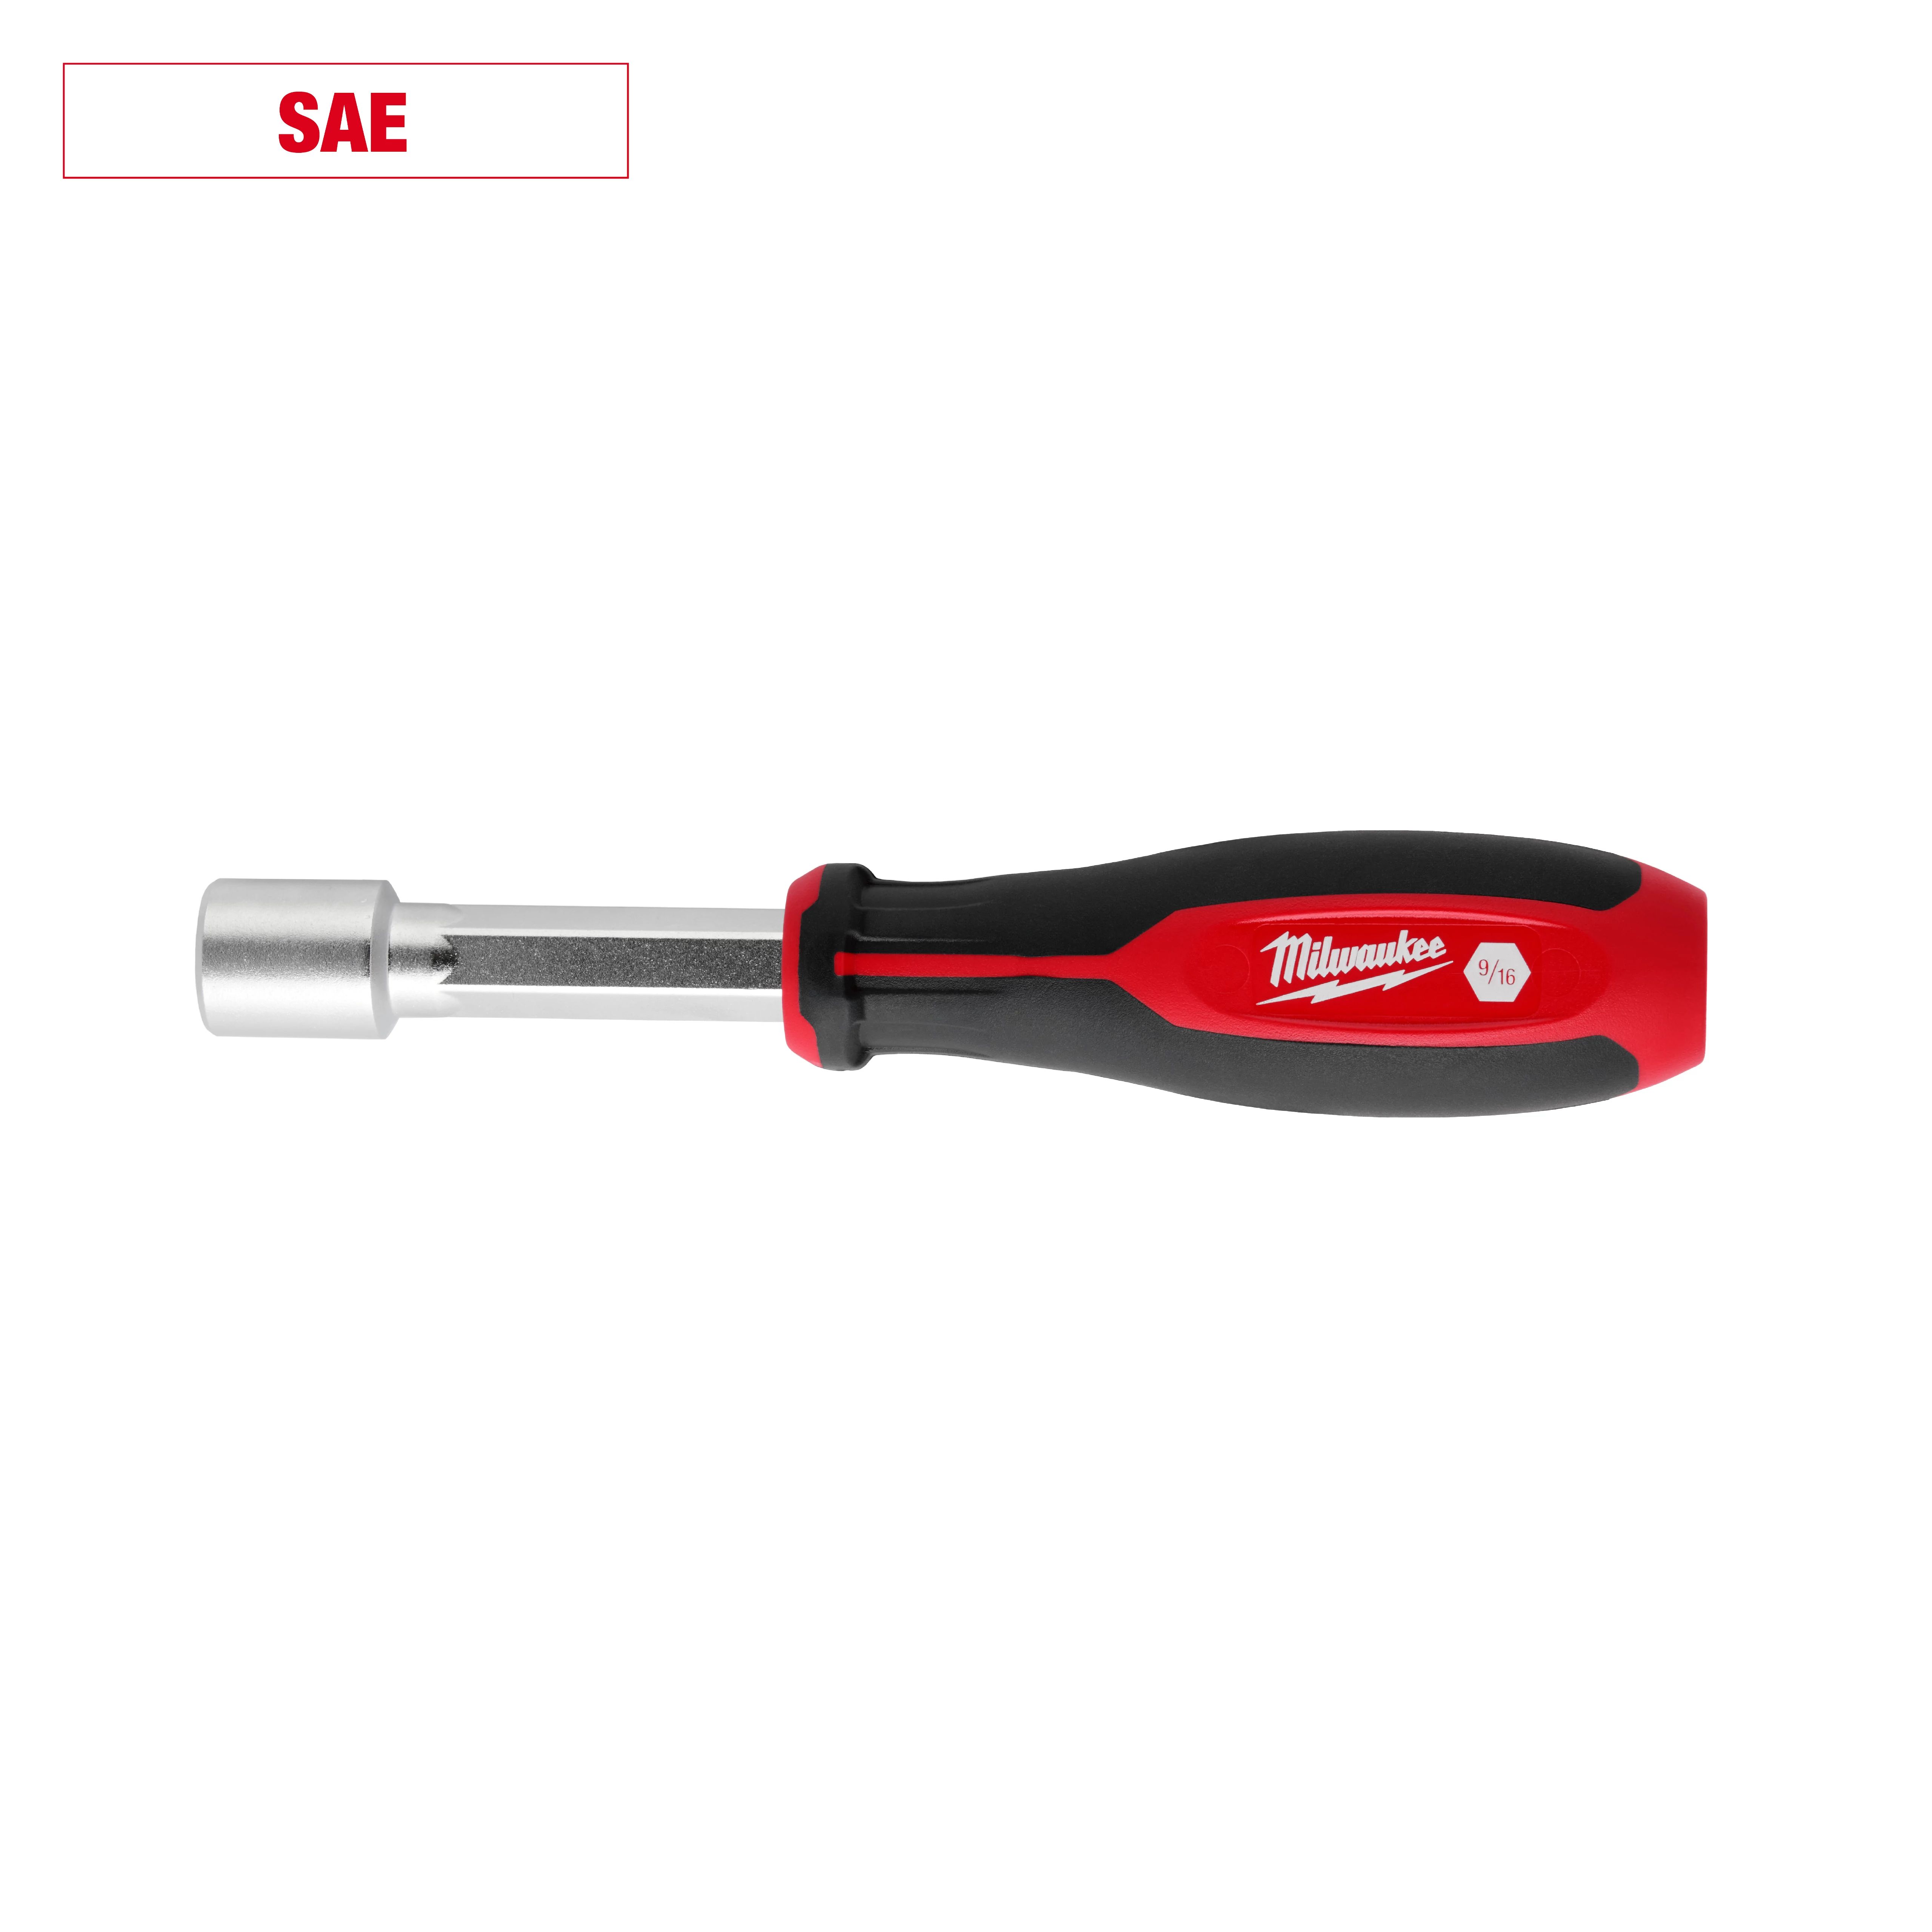 SAE HOLLOWCORE™ Nut Drivers - 9/16"